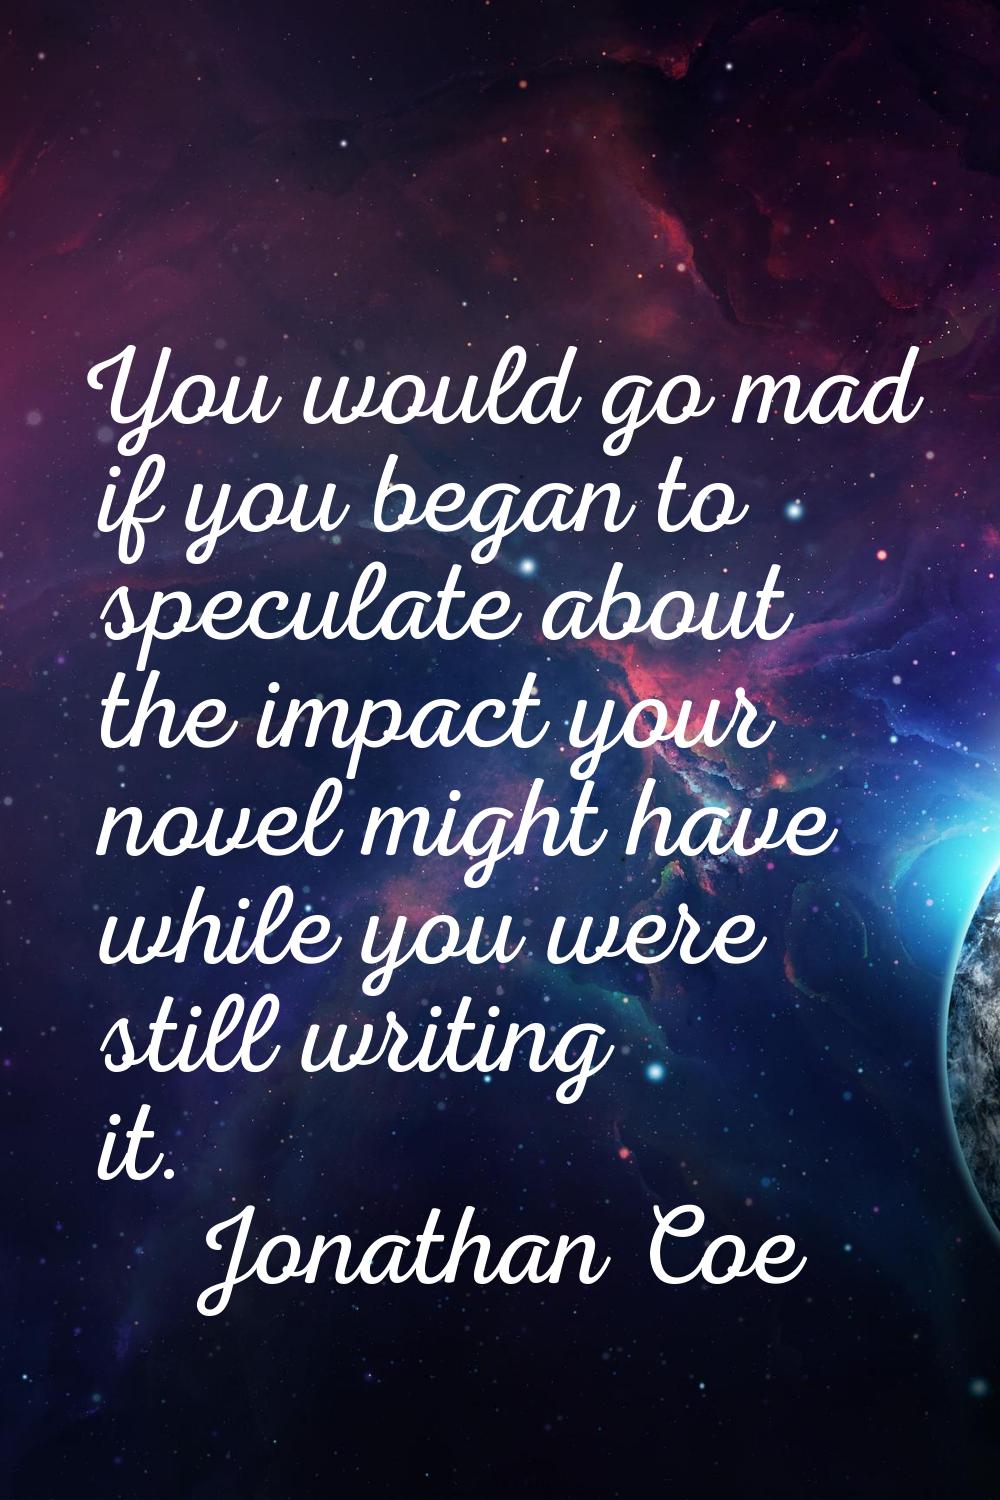 You would go mad if you began to speculate about the impact your novel might have while you were st